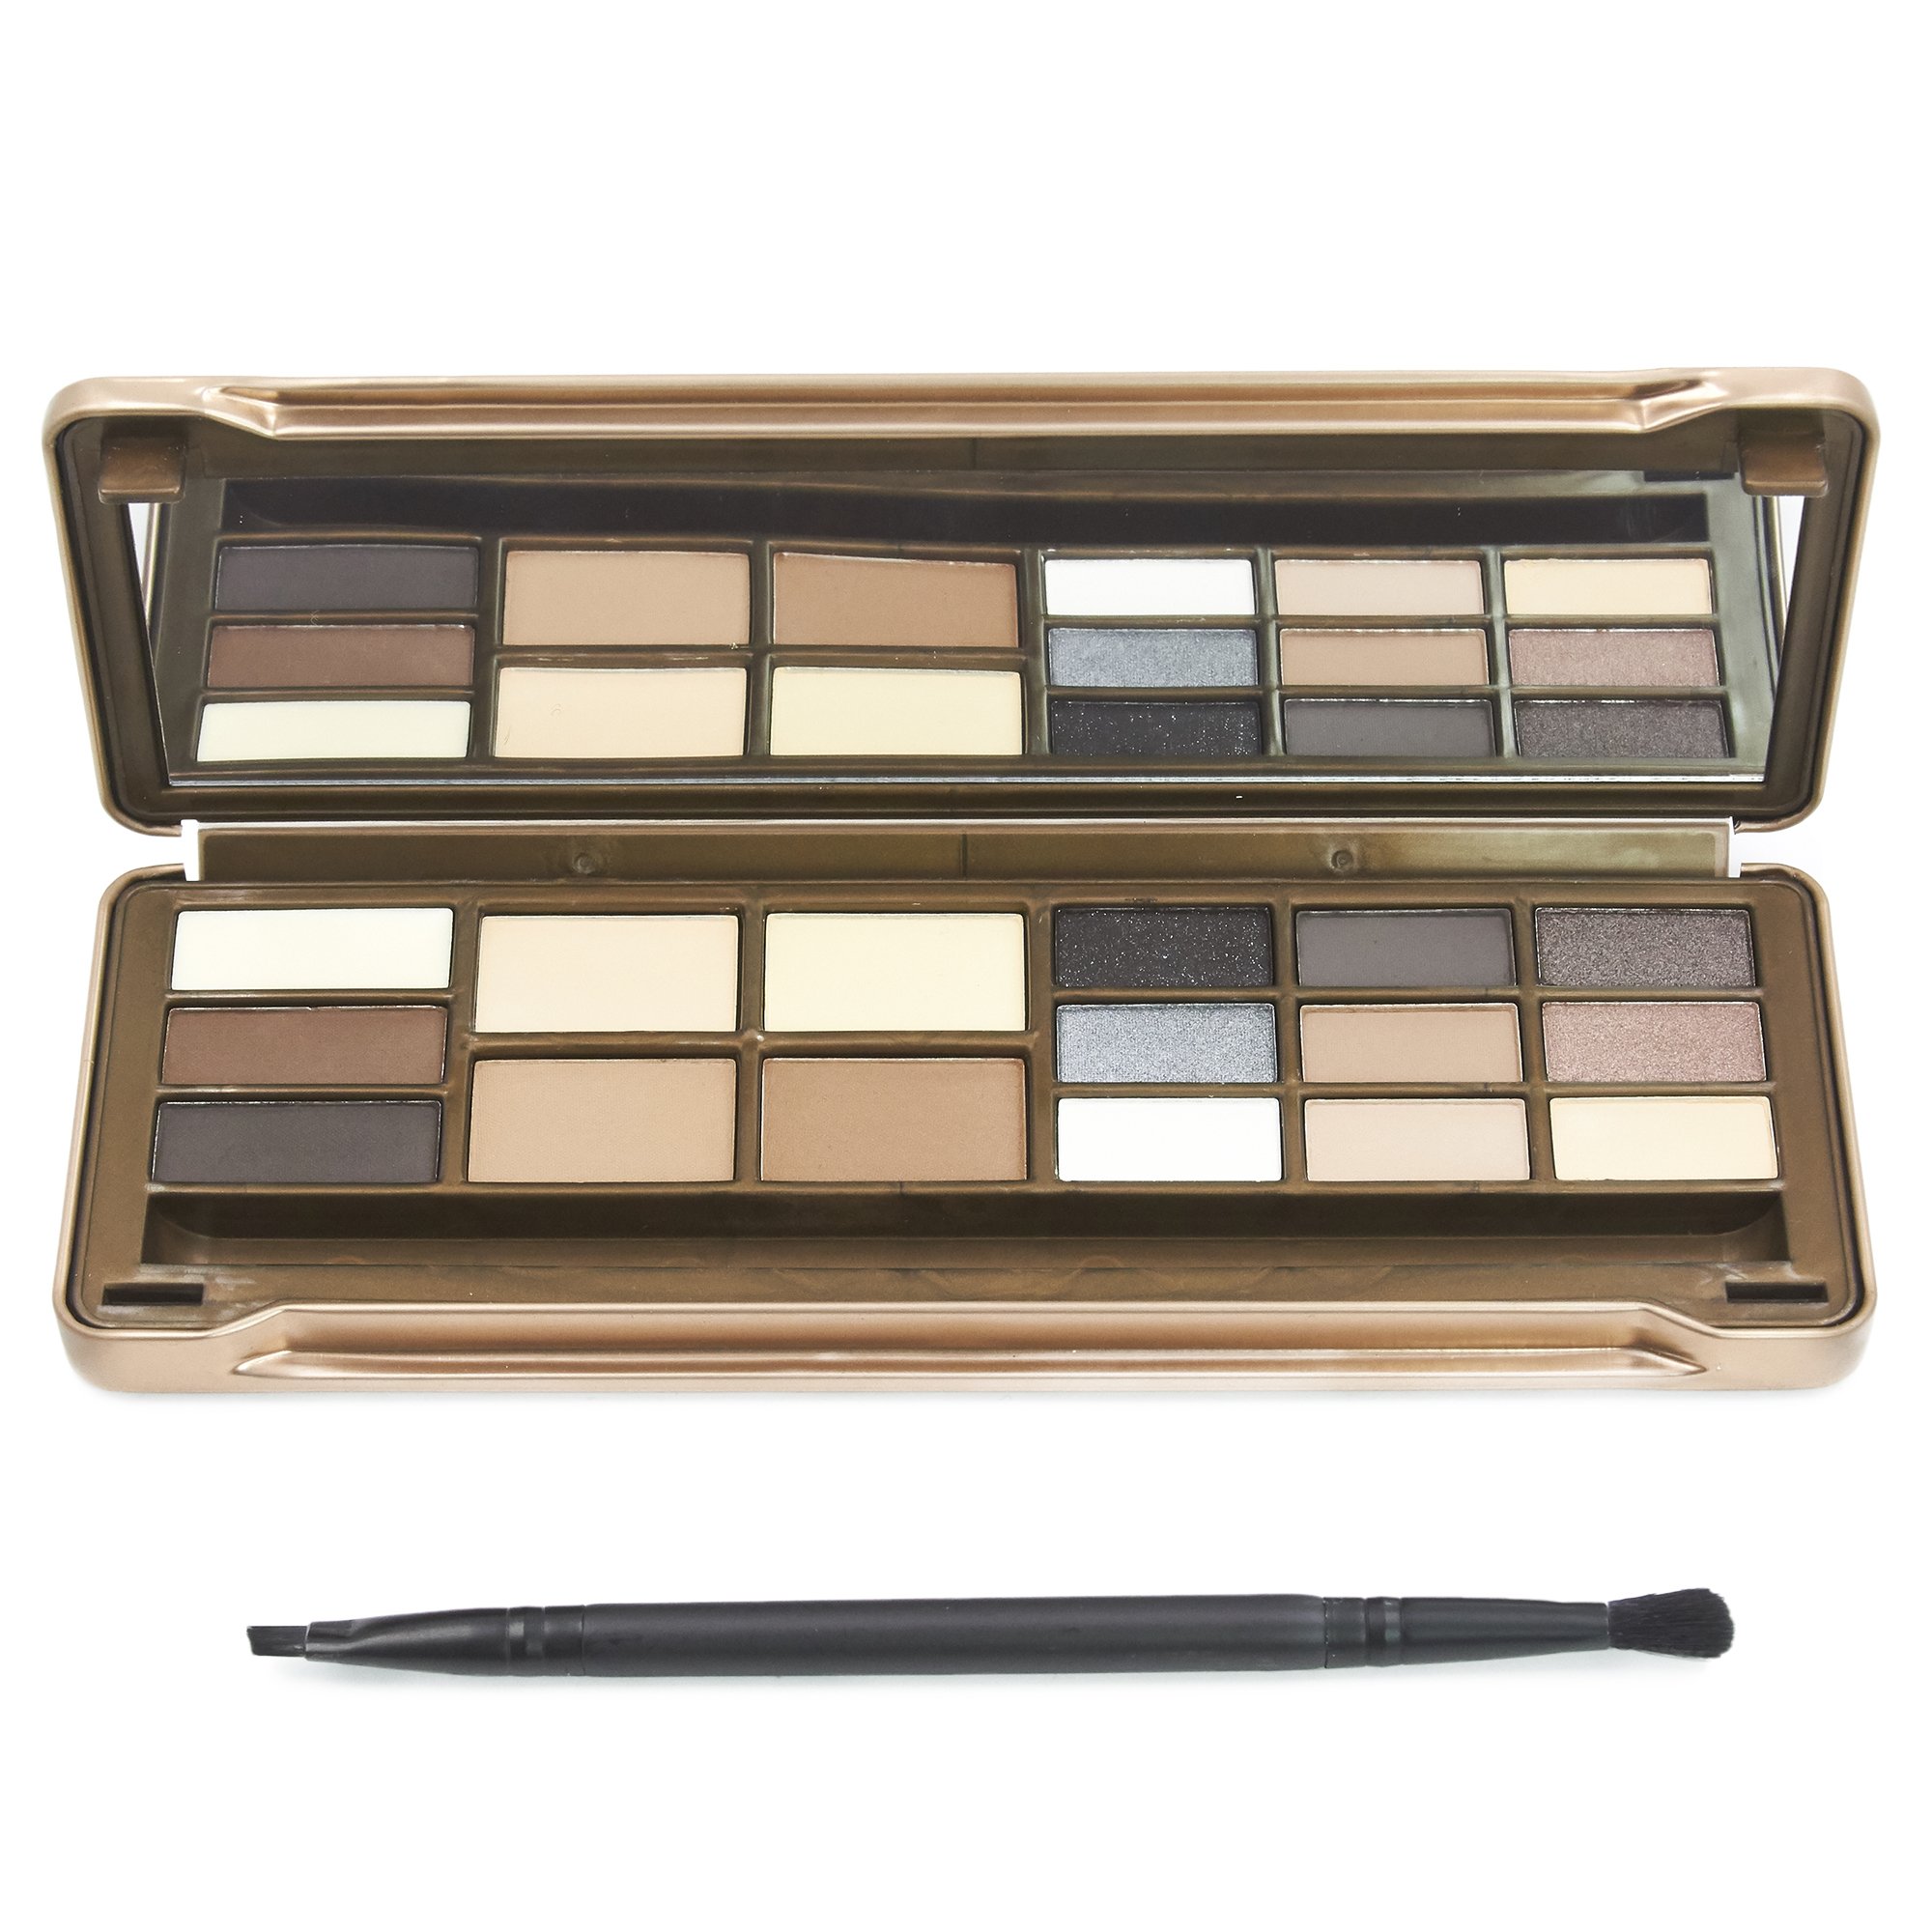 BYS Essentials - Contour, Brow and Eyeshadow Tin Palette - 3-in-1 Makeup Kit, Easy to Carry Travel-Ready Beauty Set